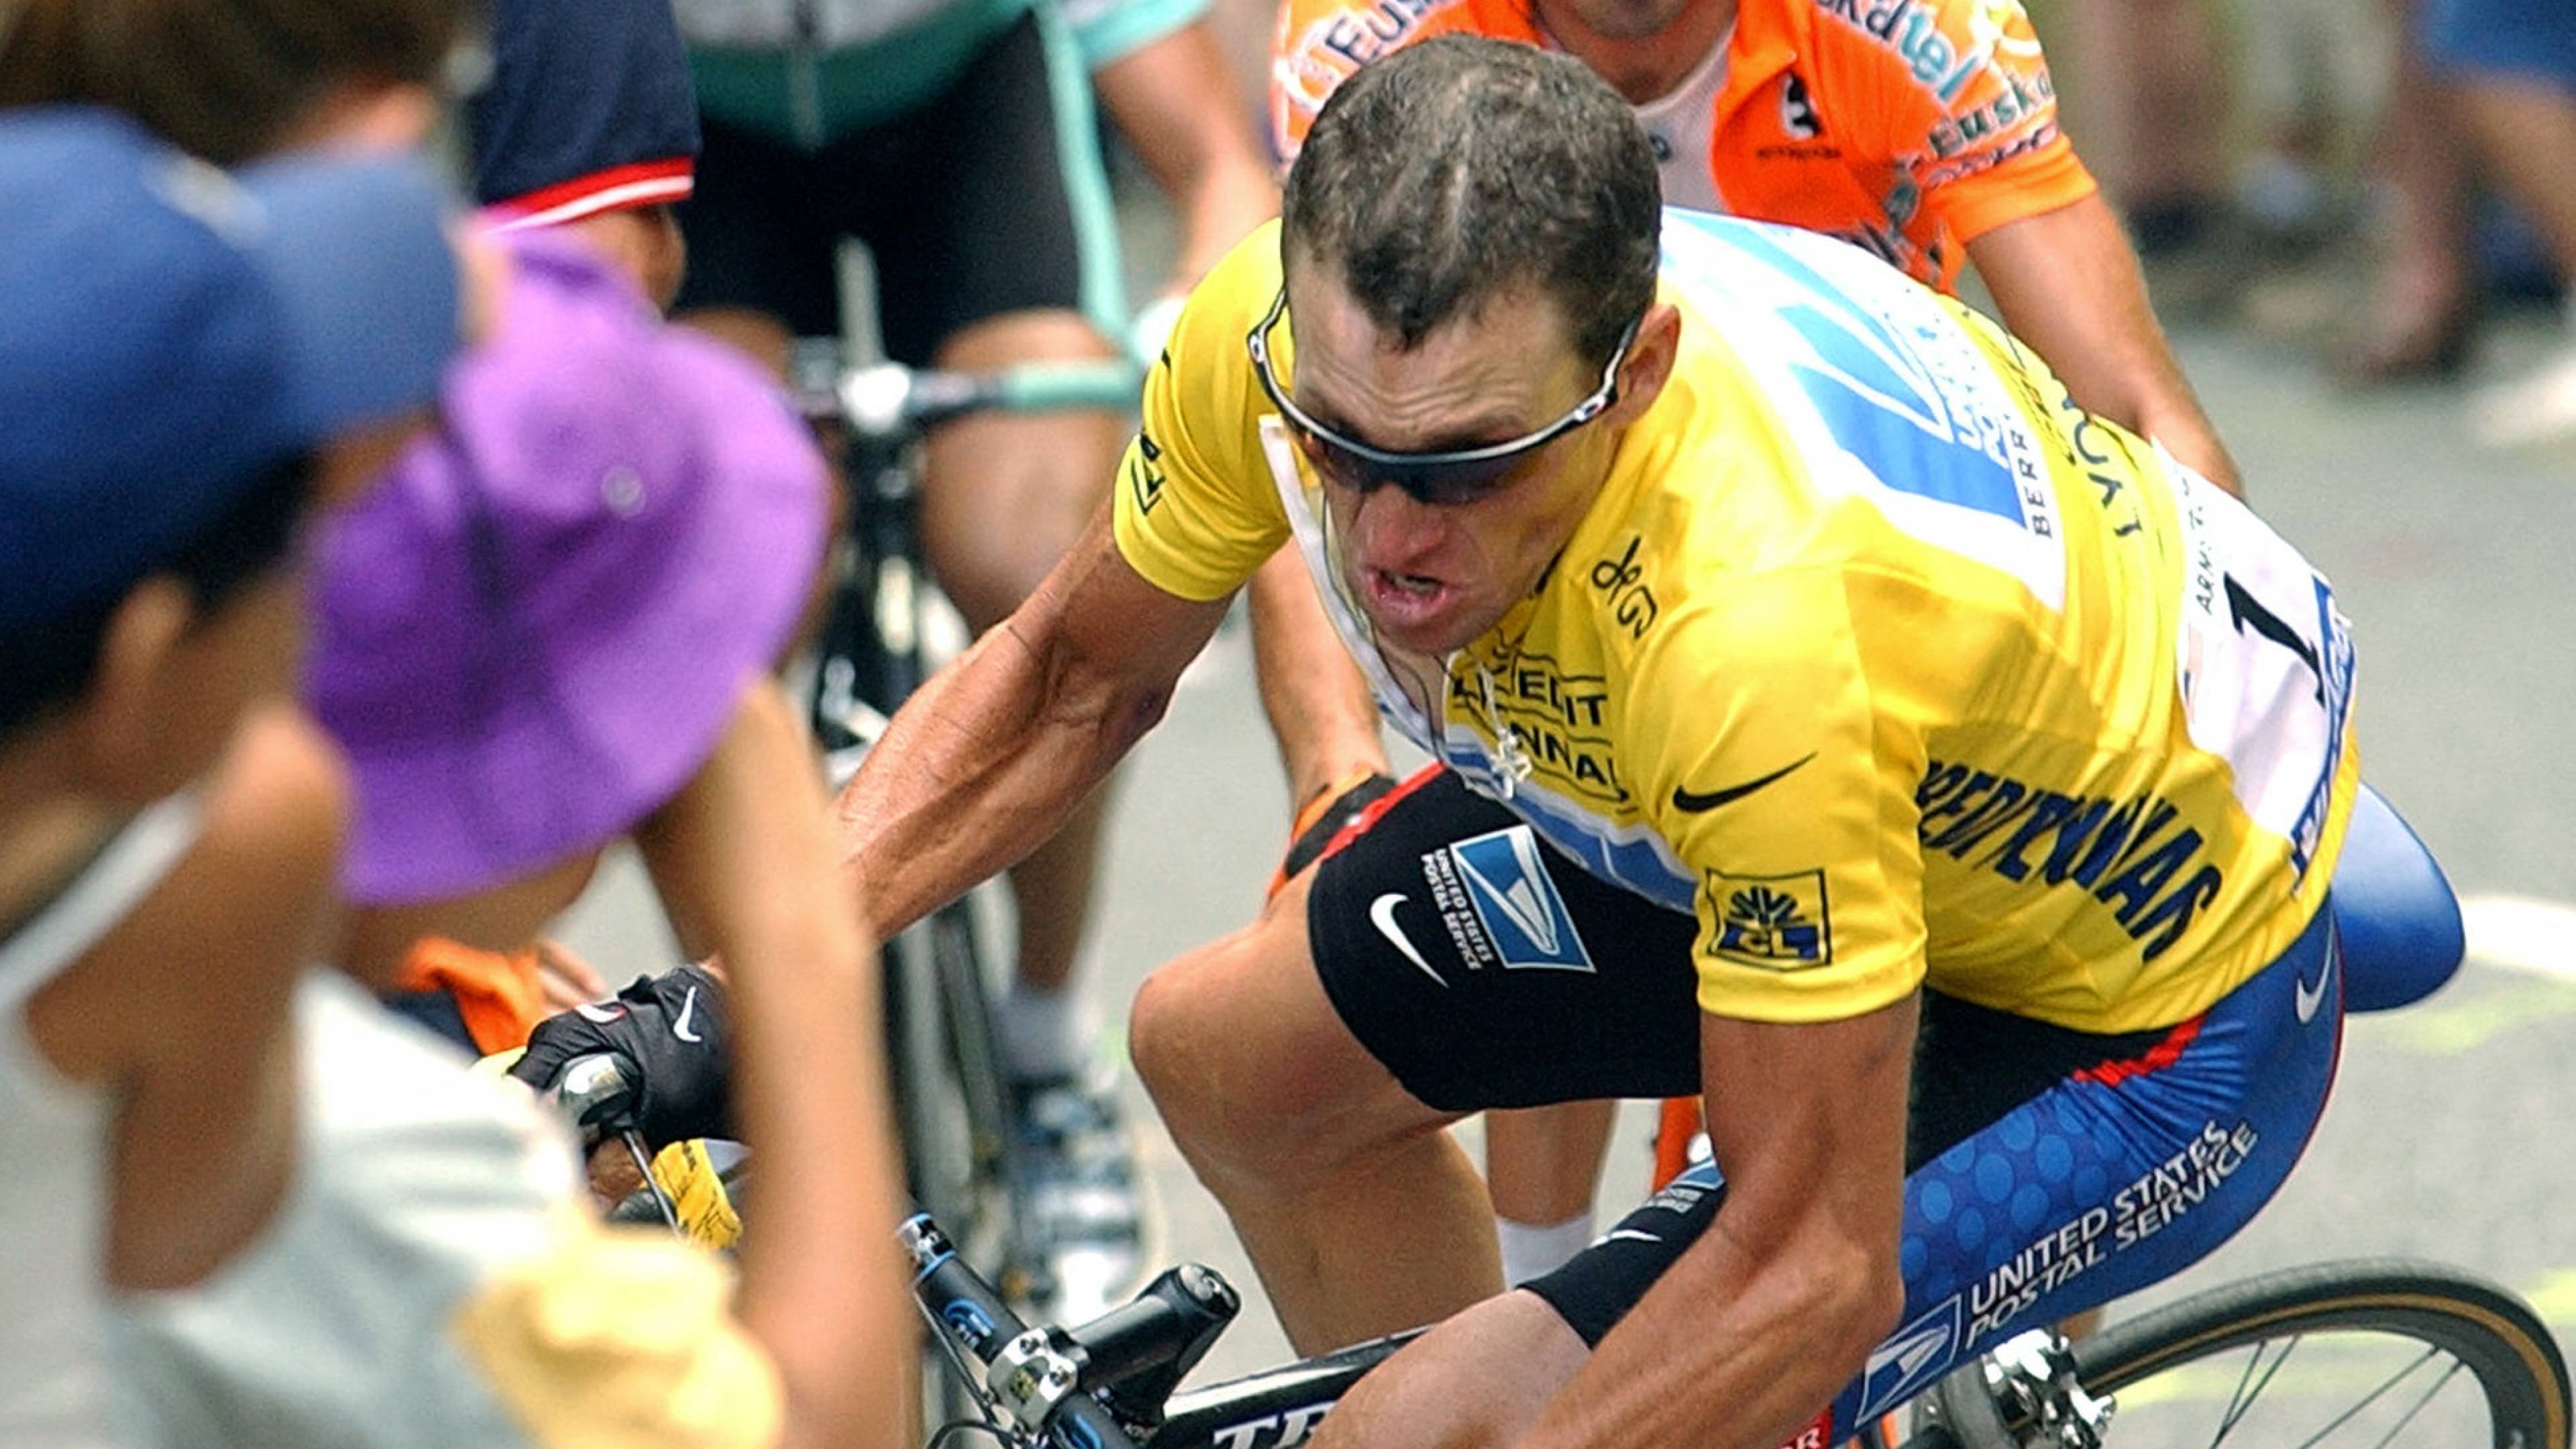 Lance Armstrong, Stage 18 finish, Luz Ardiden, Cycling mishap, 3840x2160 4K Desktop